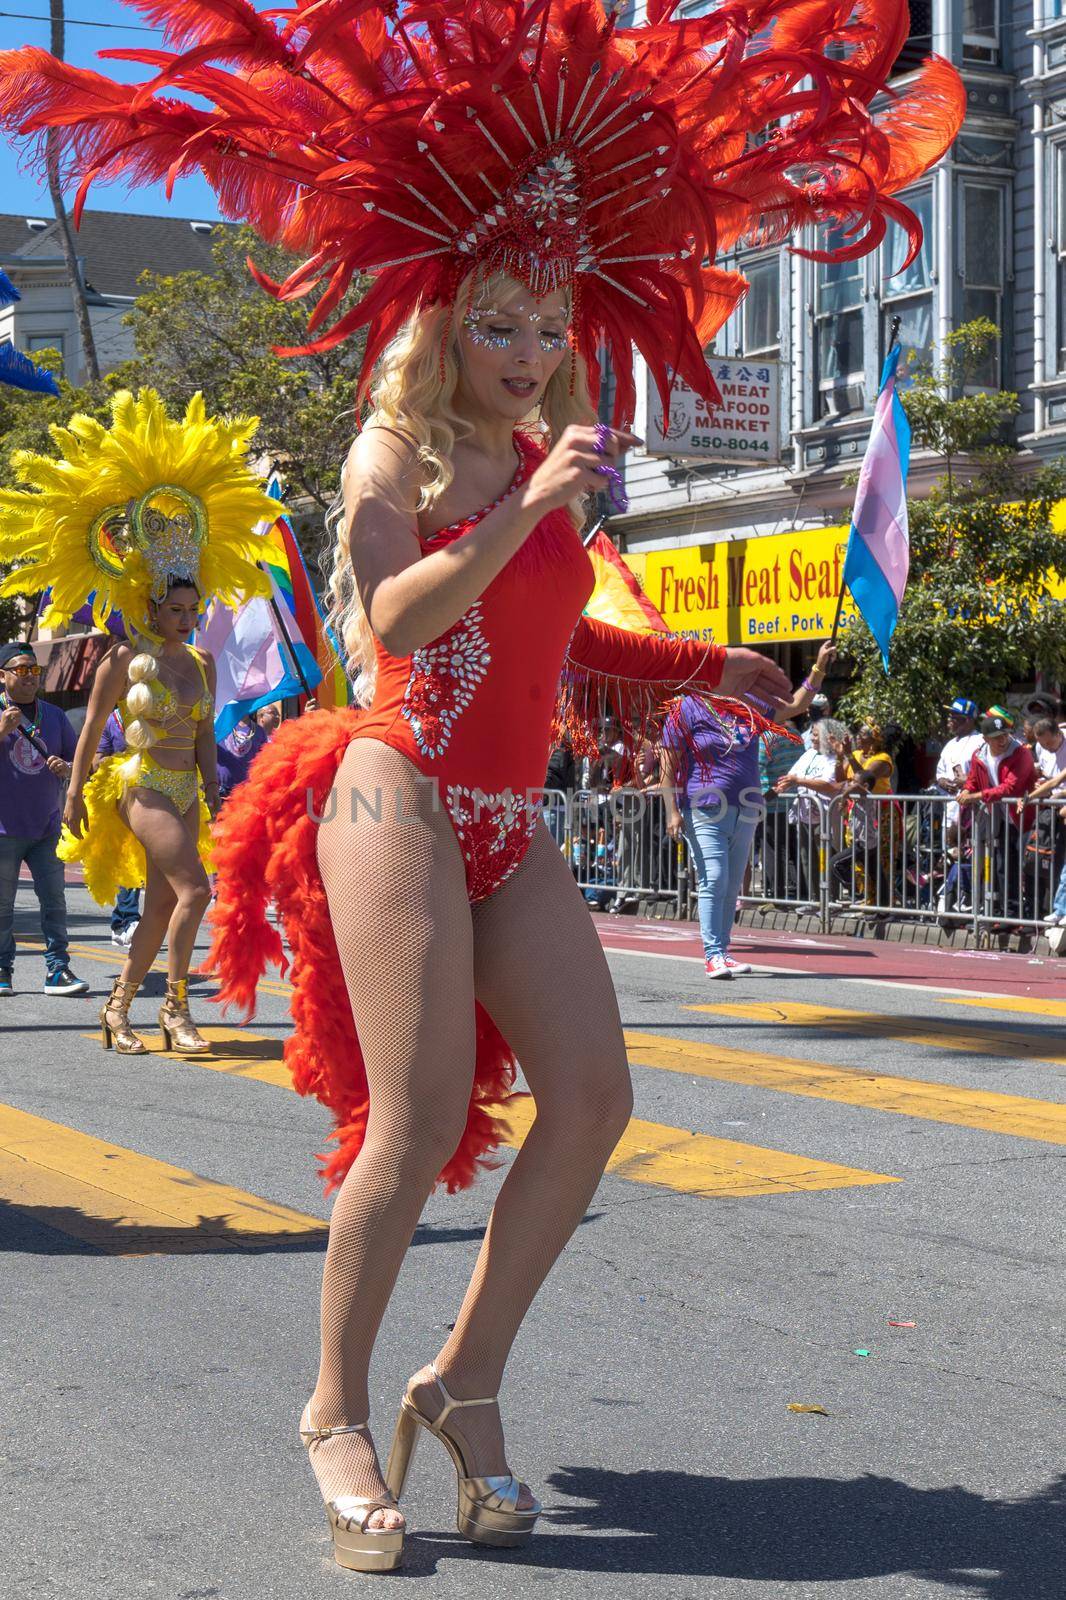 Carnaval San Francisco is an annual celebration of music, dancing, food, drink and art in the city's Mission district.